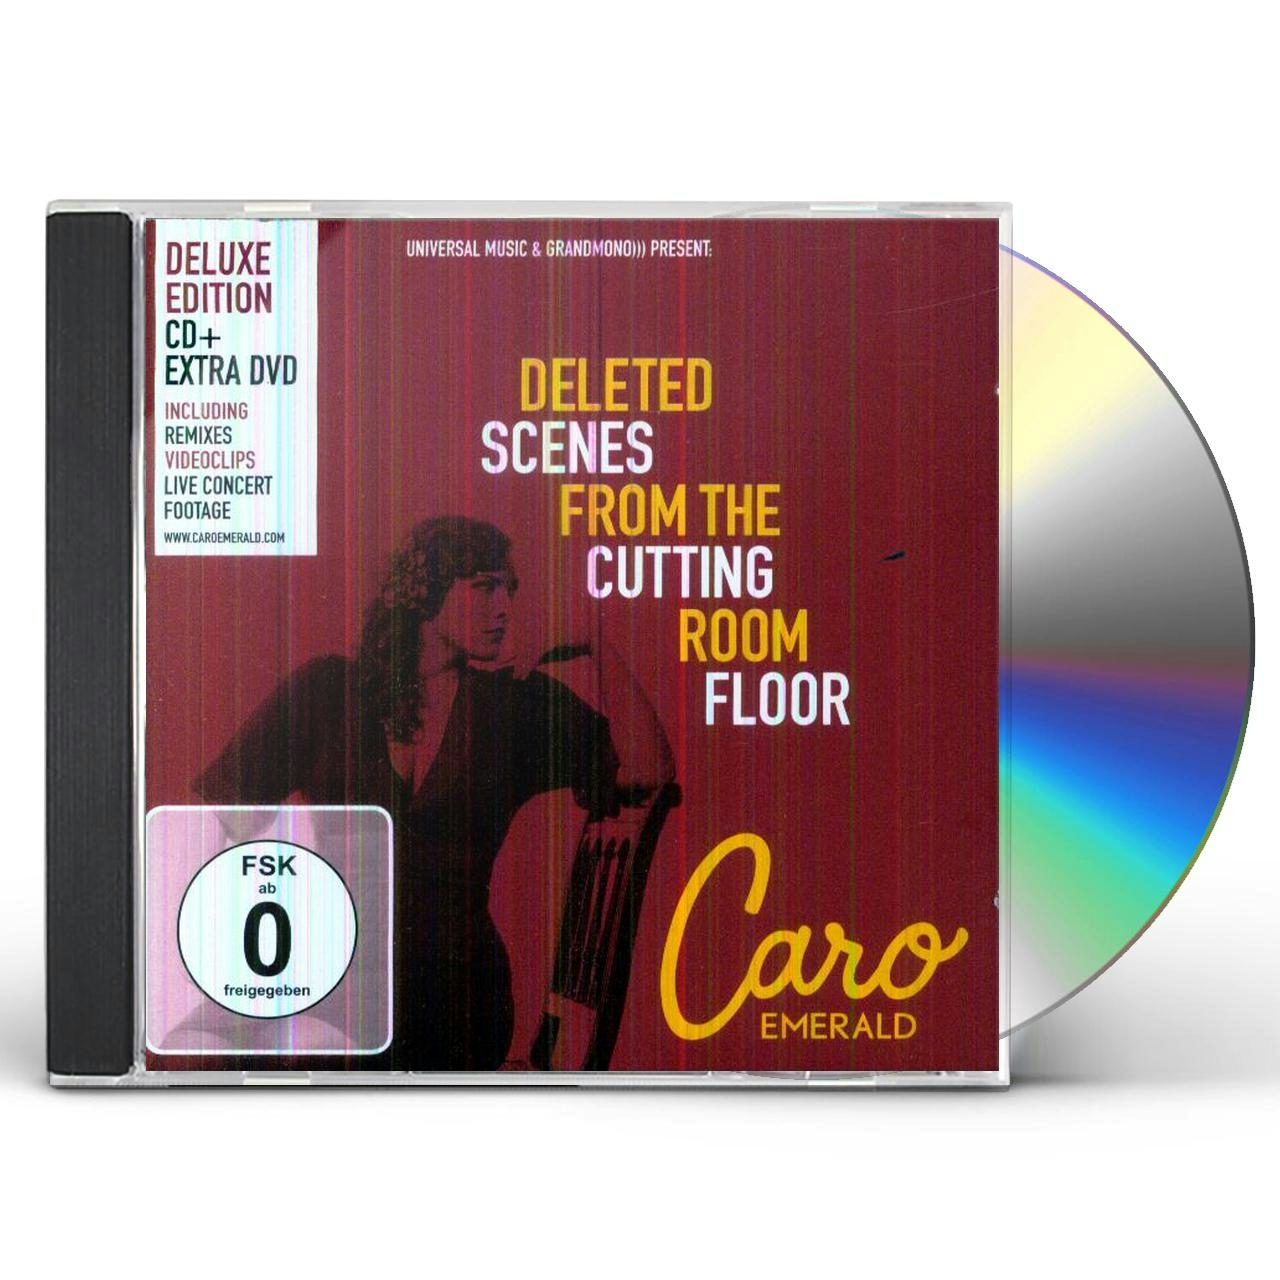 caro emerald deleted scenes from the cutting room